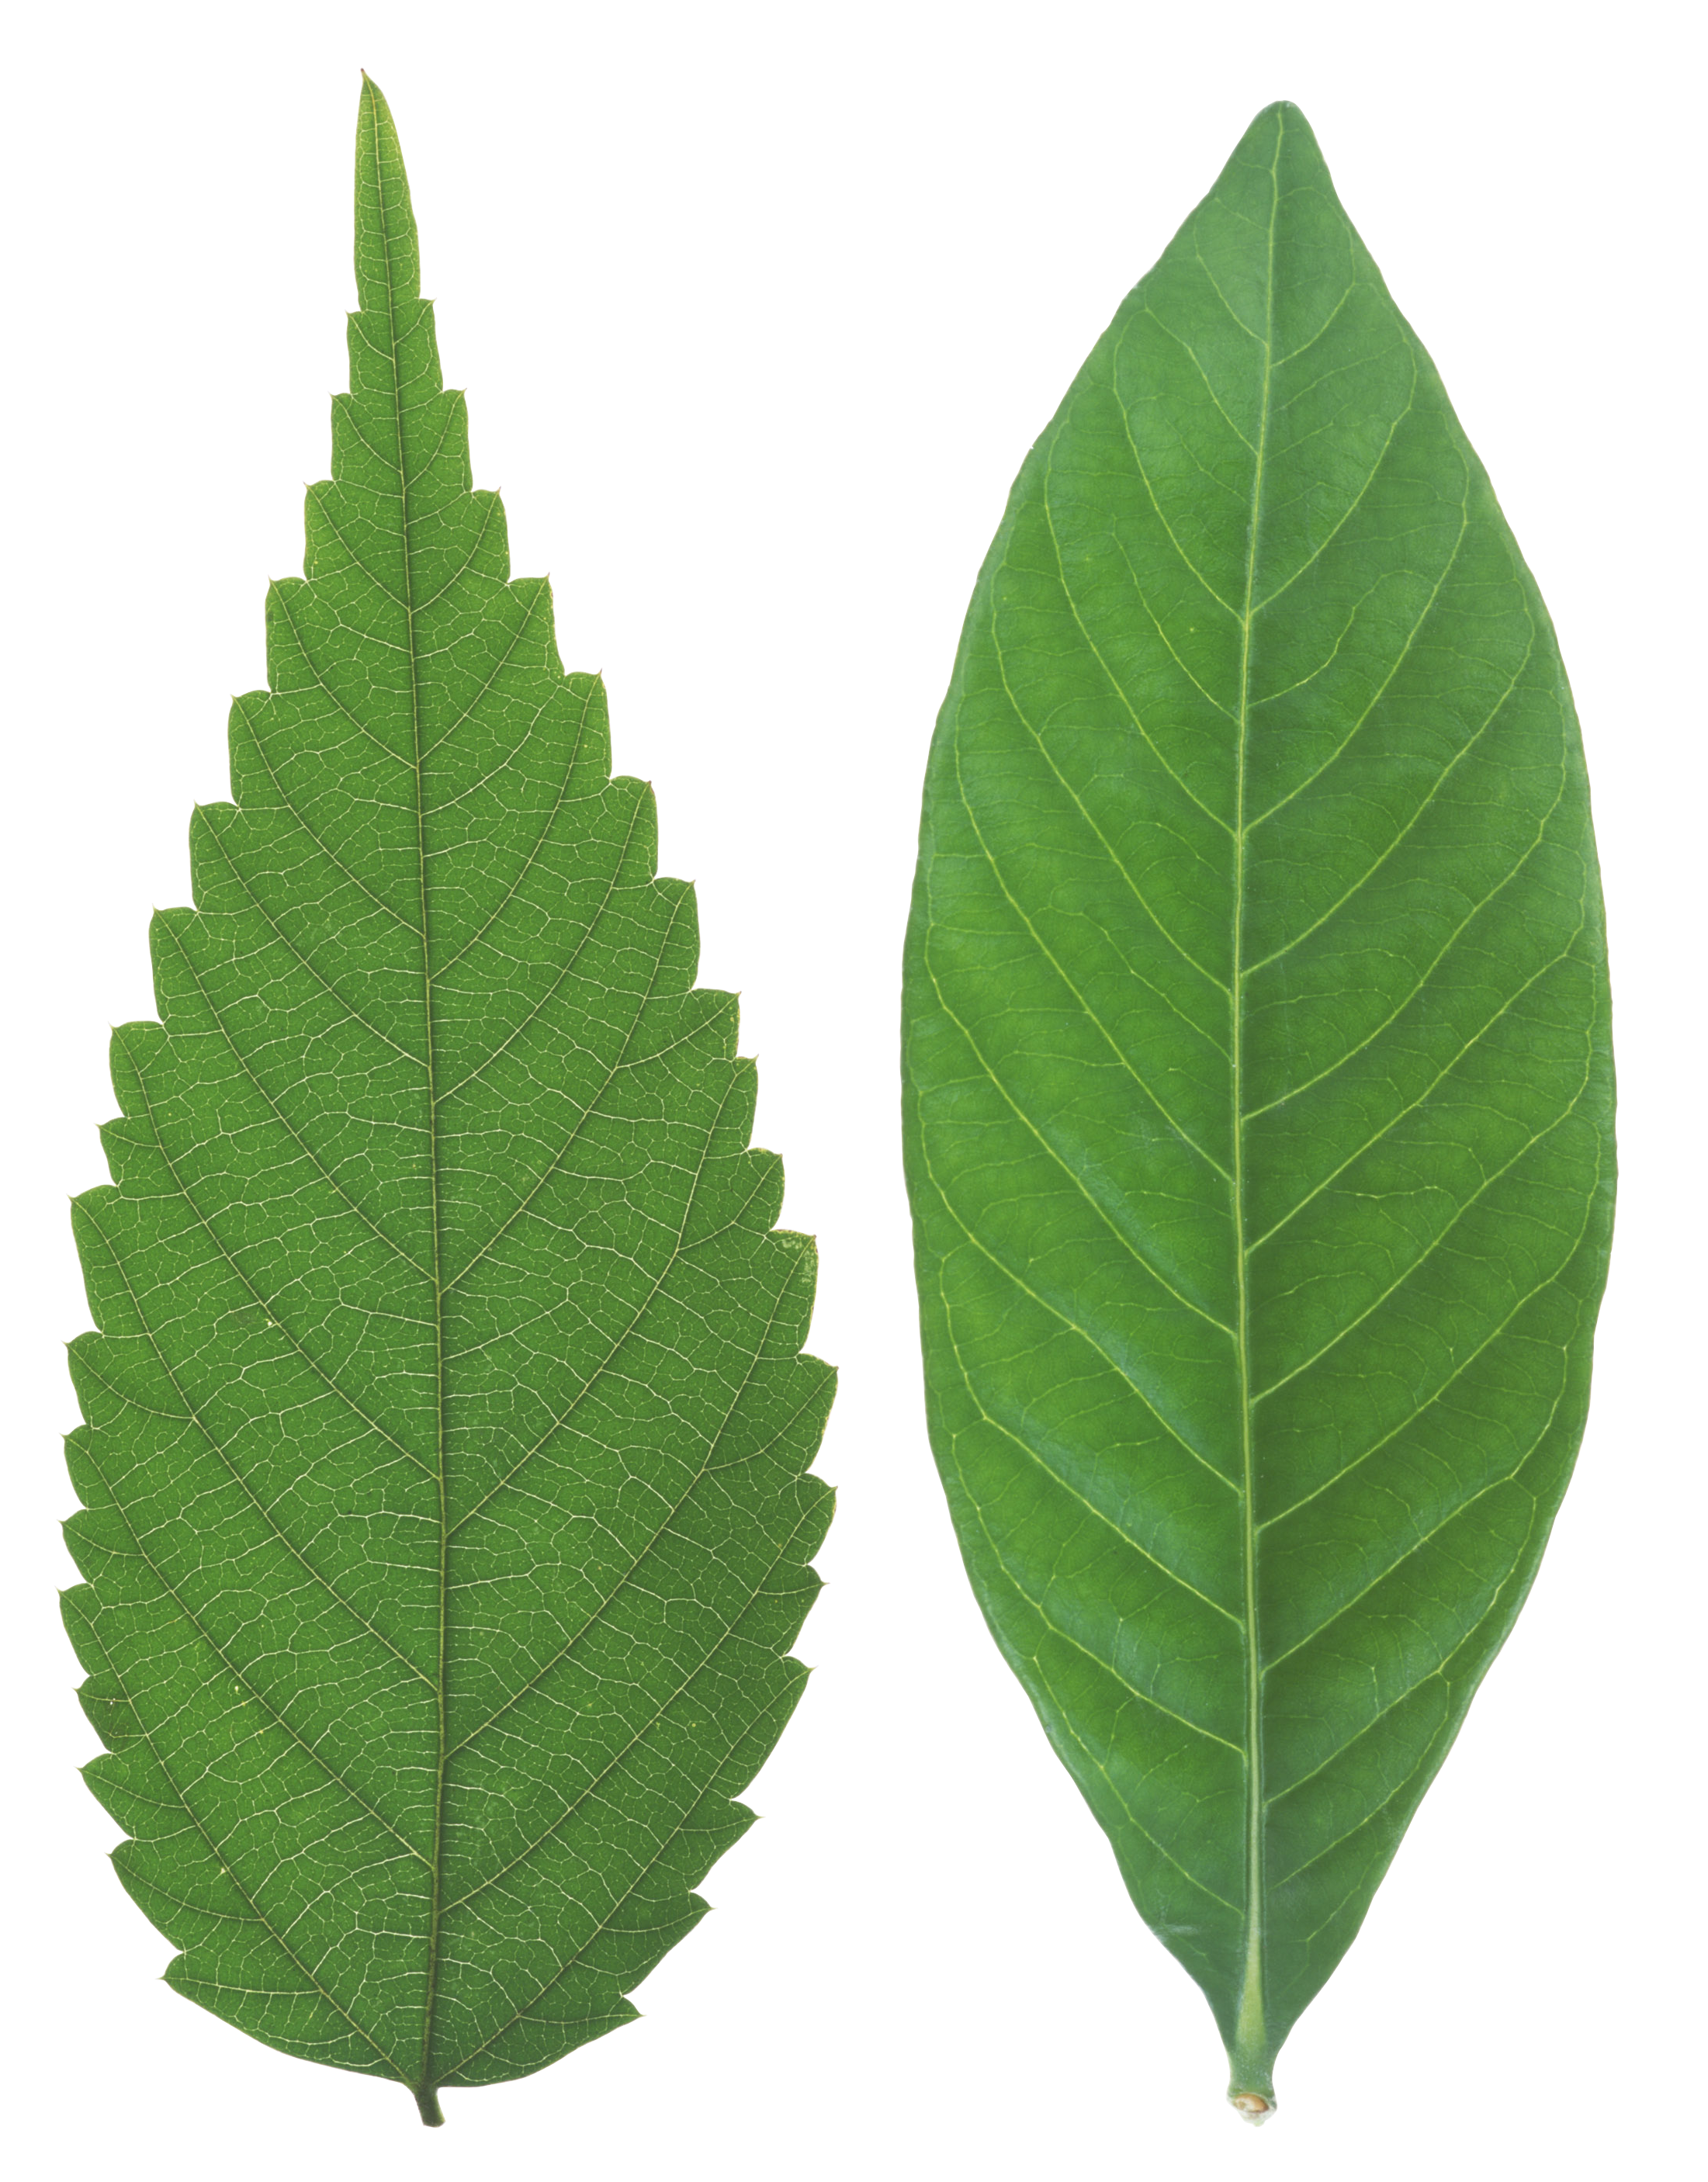 Green leaves PNG images free download pictures